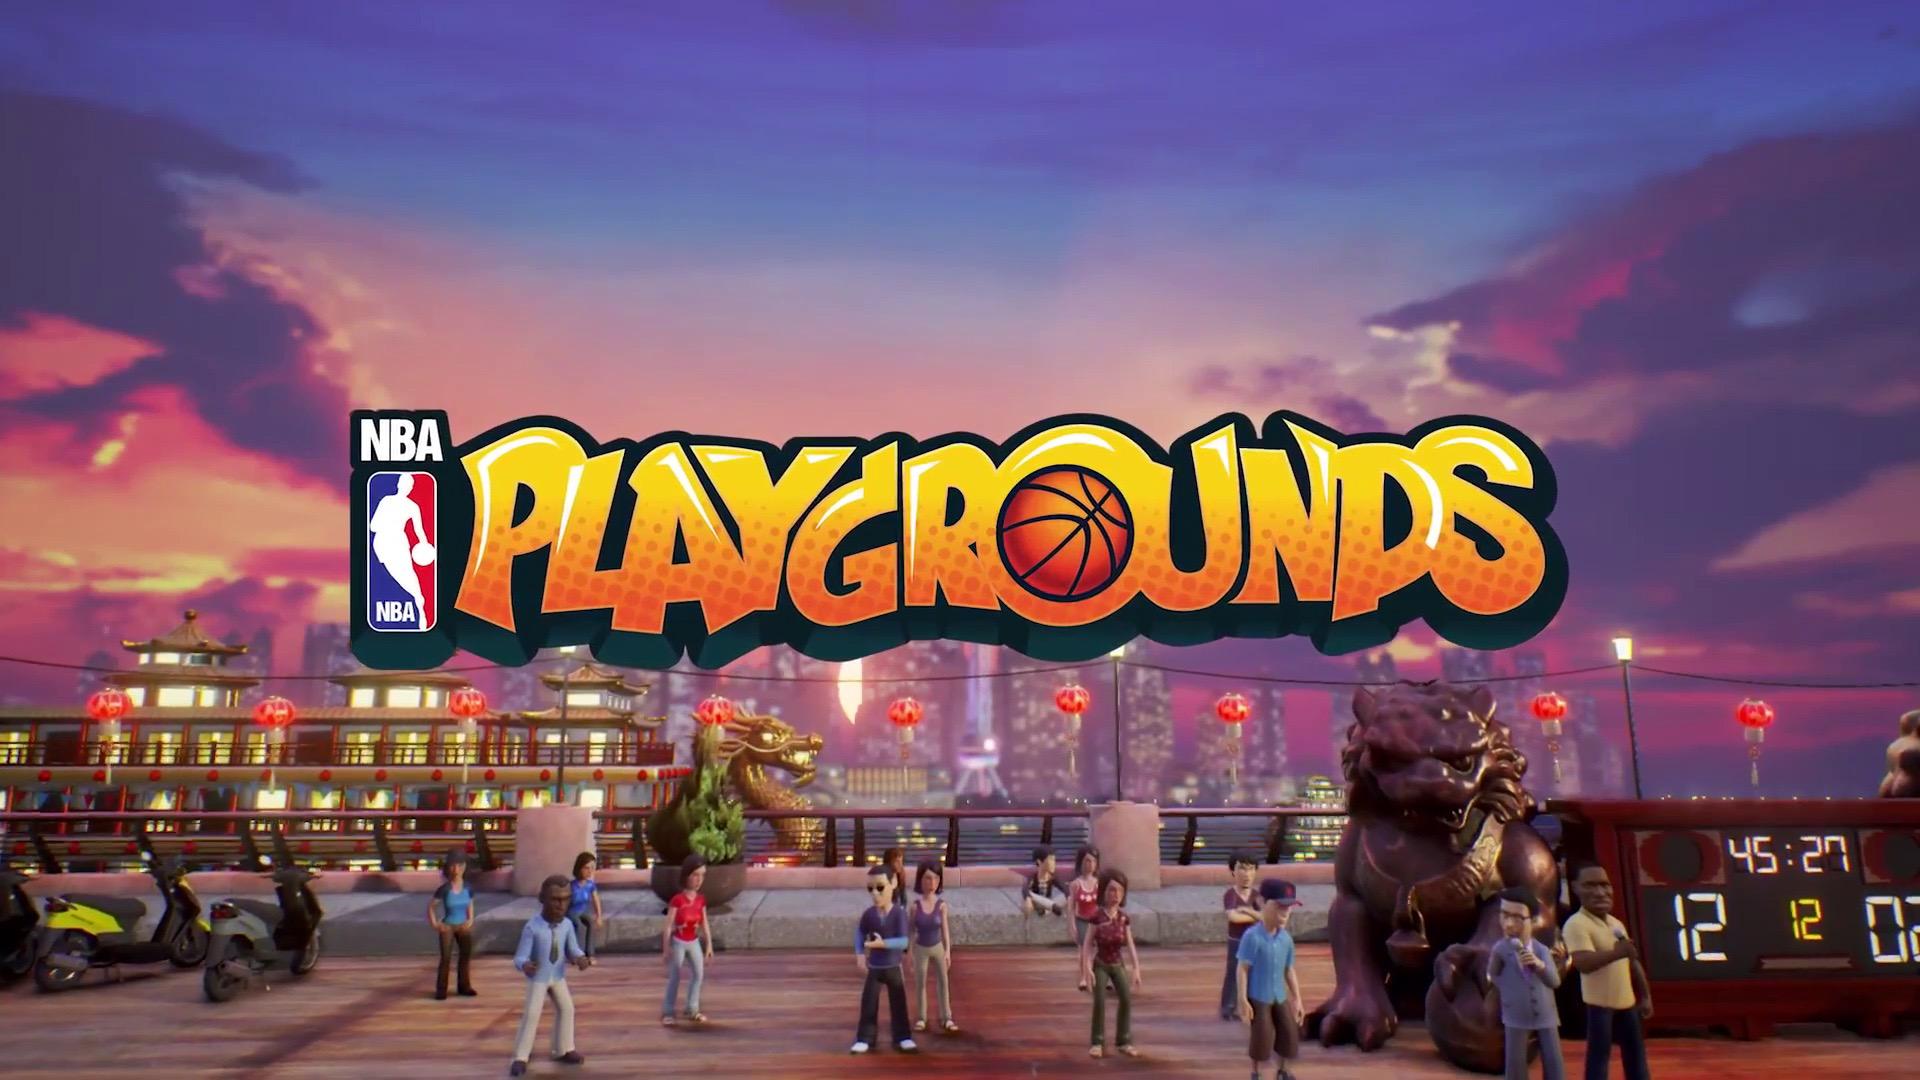 Nba Playgrounds Free Download Crohasit Download Pc Games For Free